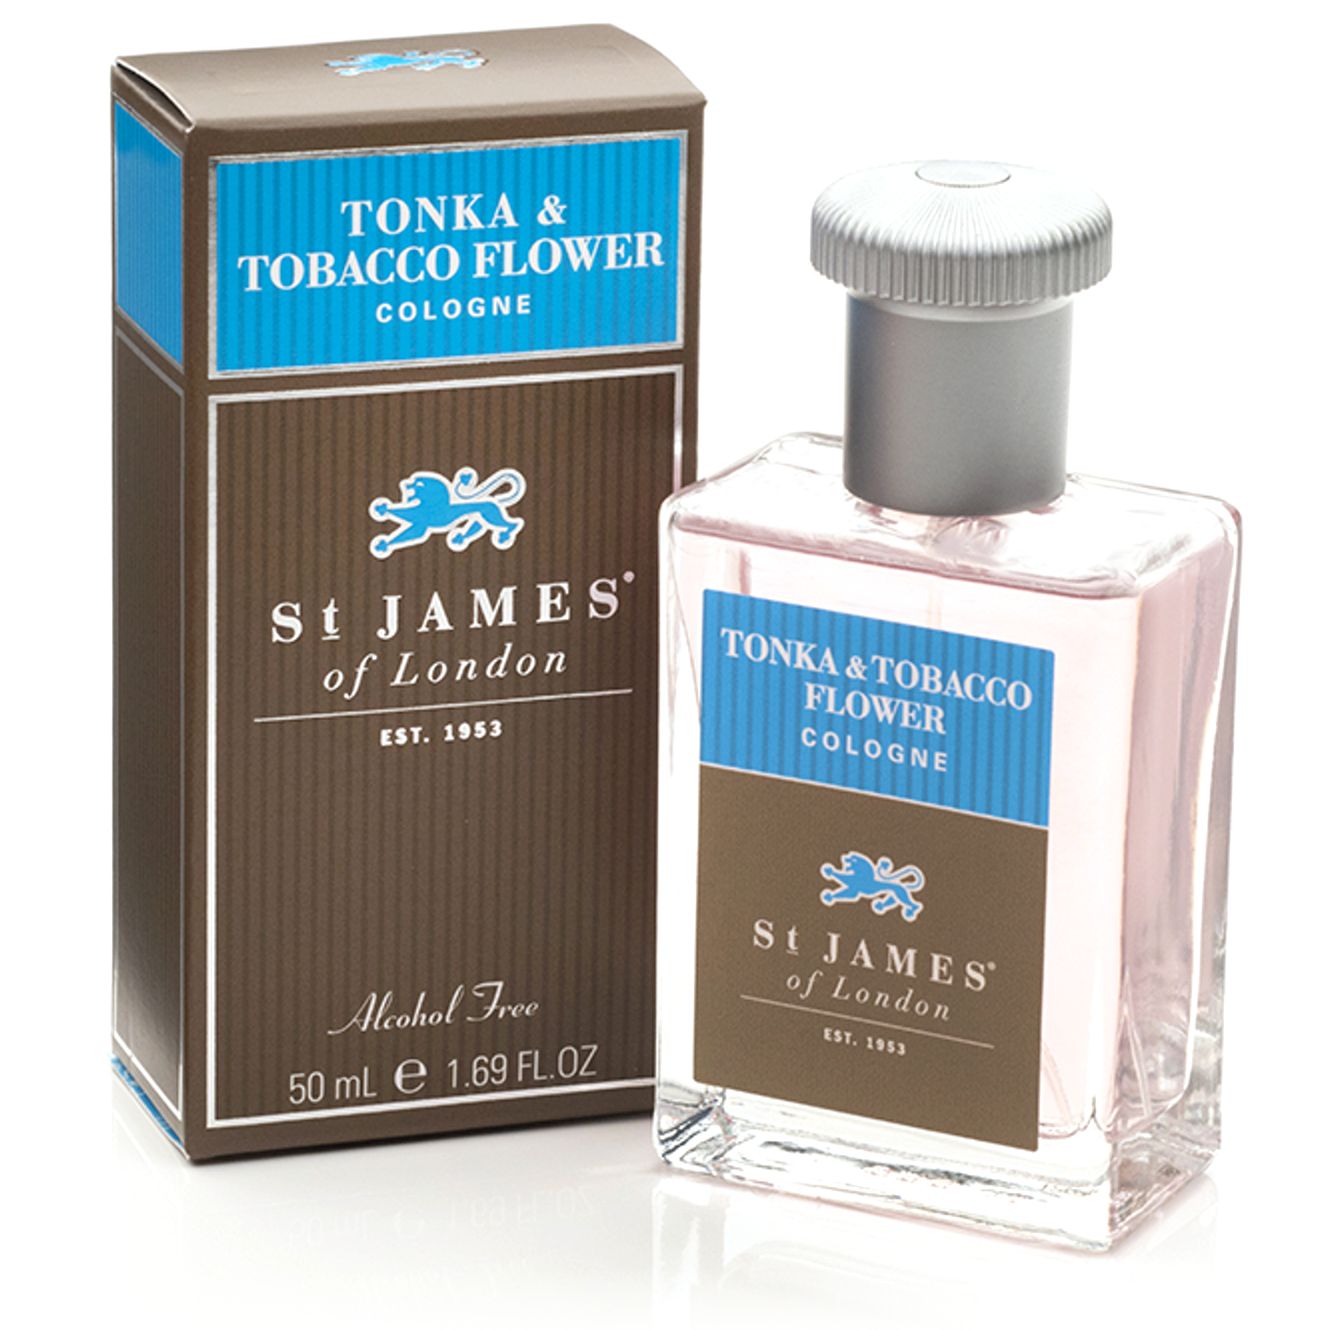 Tonka Bean & Tobacco Flower Cologne by St. James of London